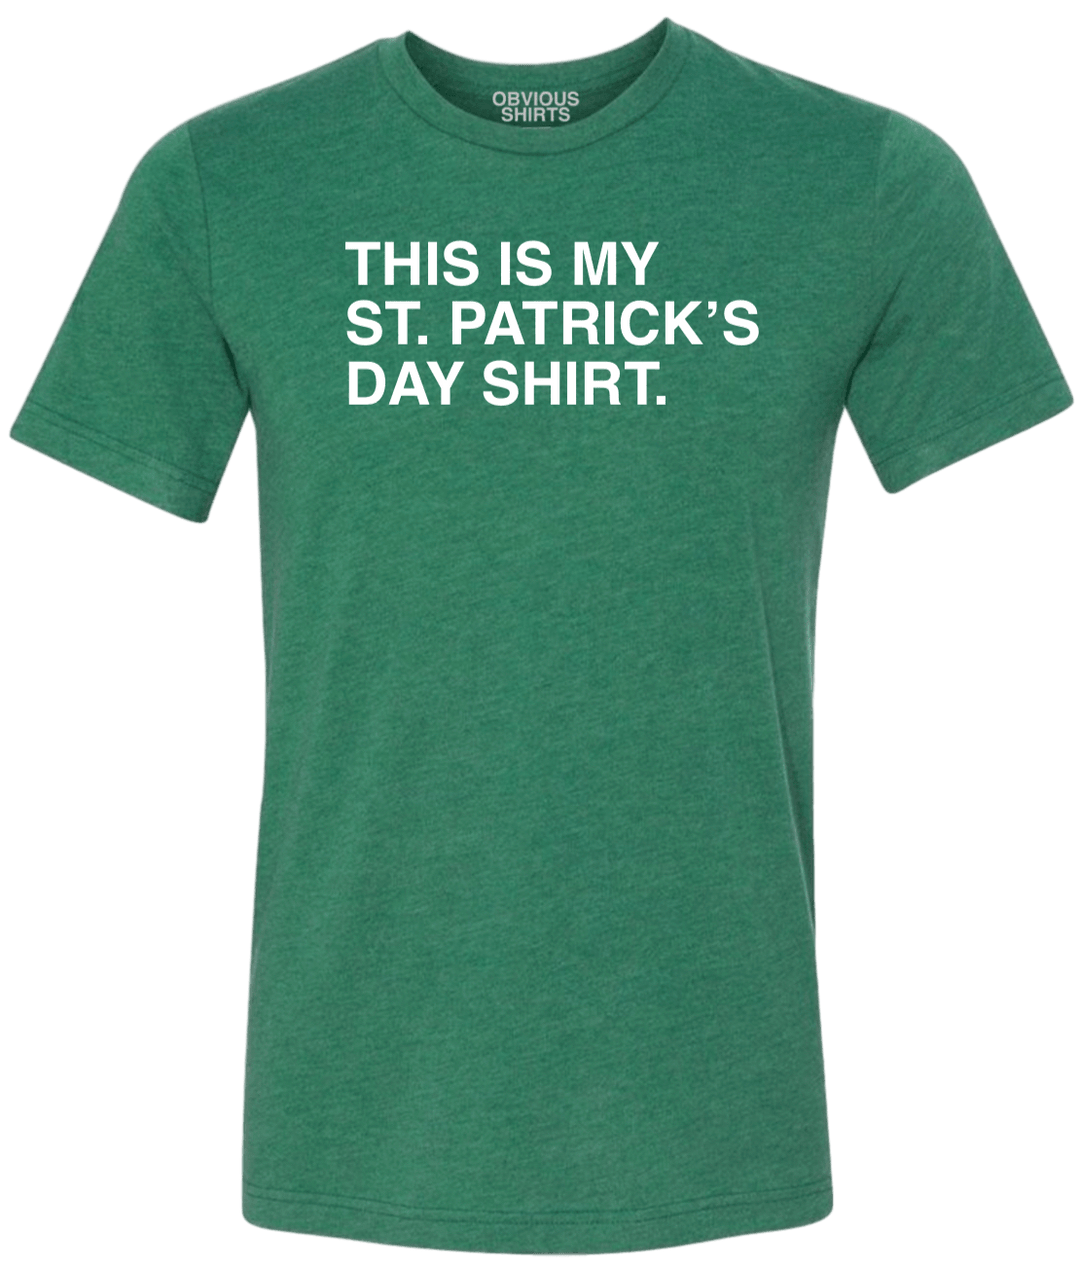 THIS IS MY ST. PATRICK'S DAY SHIRT. - OBVIOUS SHIRTS.